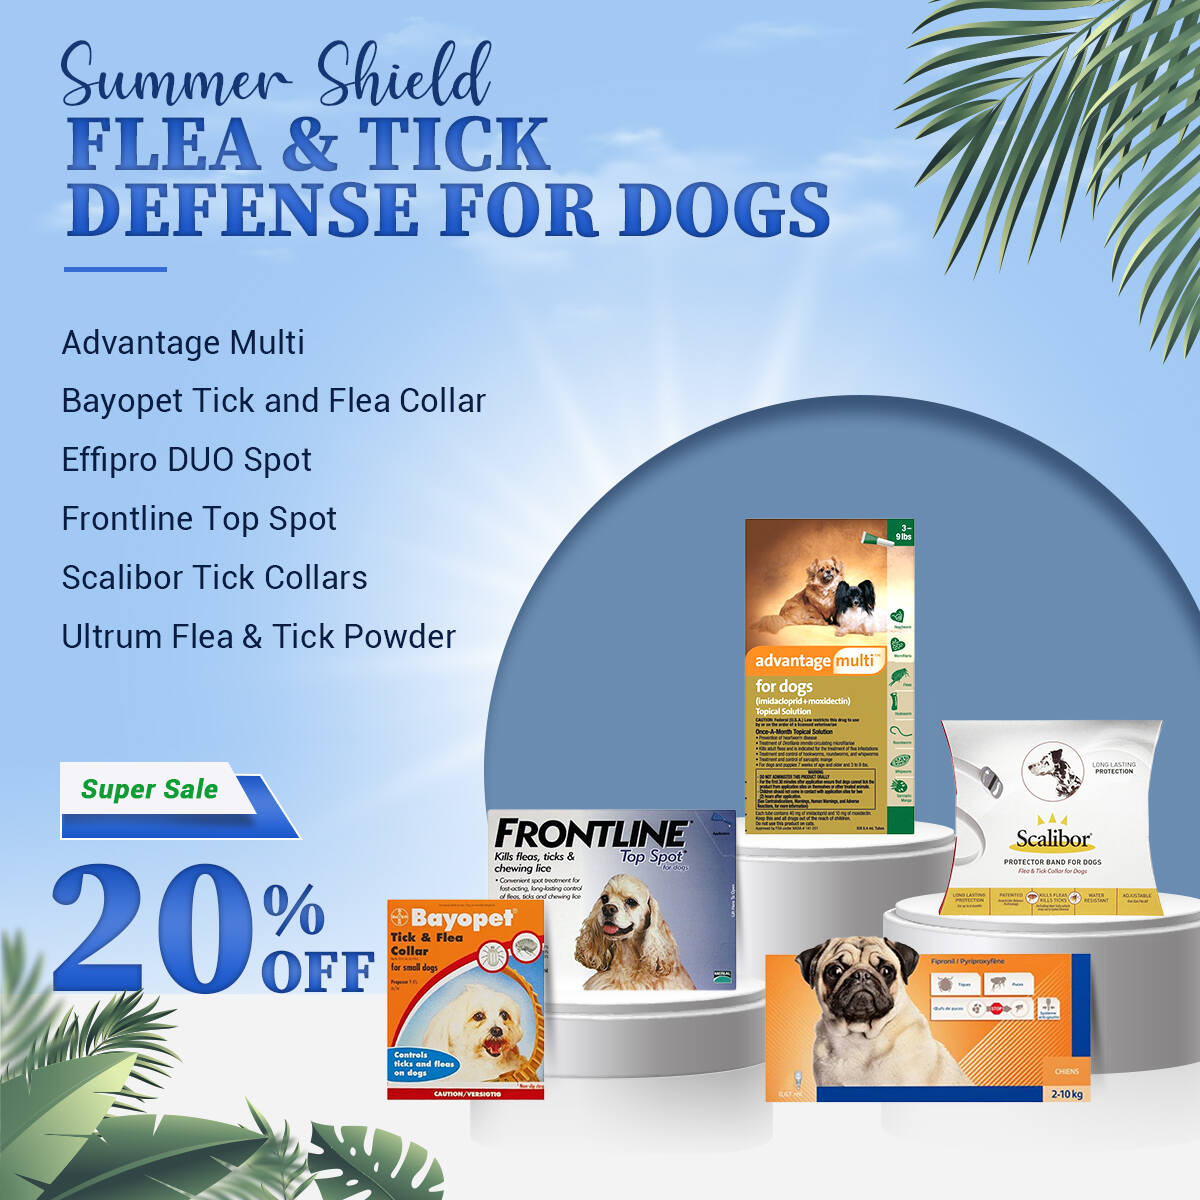 Canadavetcare : Summer Flea and Tick Sale 20 % Off | Pet Supply  - New York Animal, Pet Services